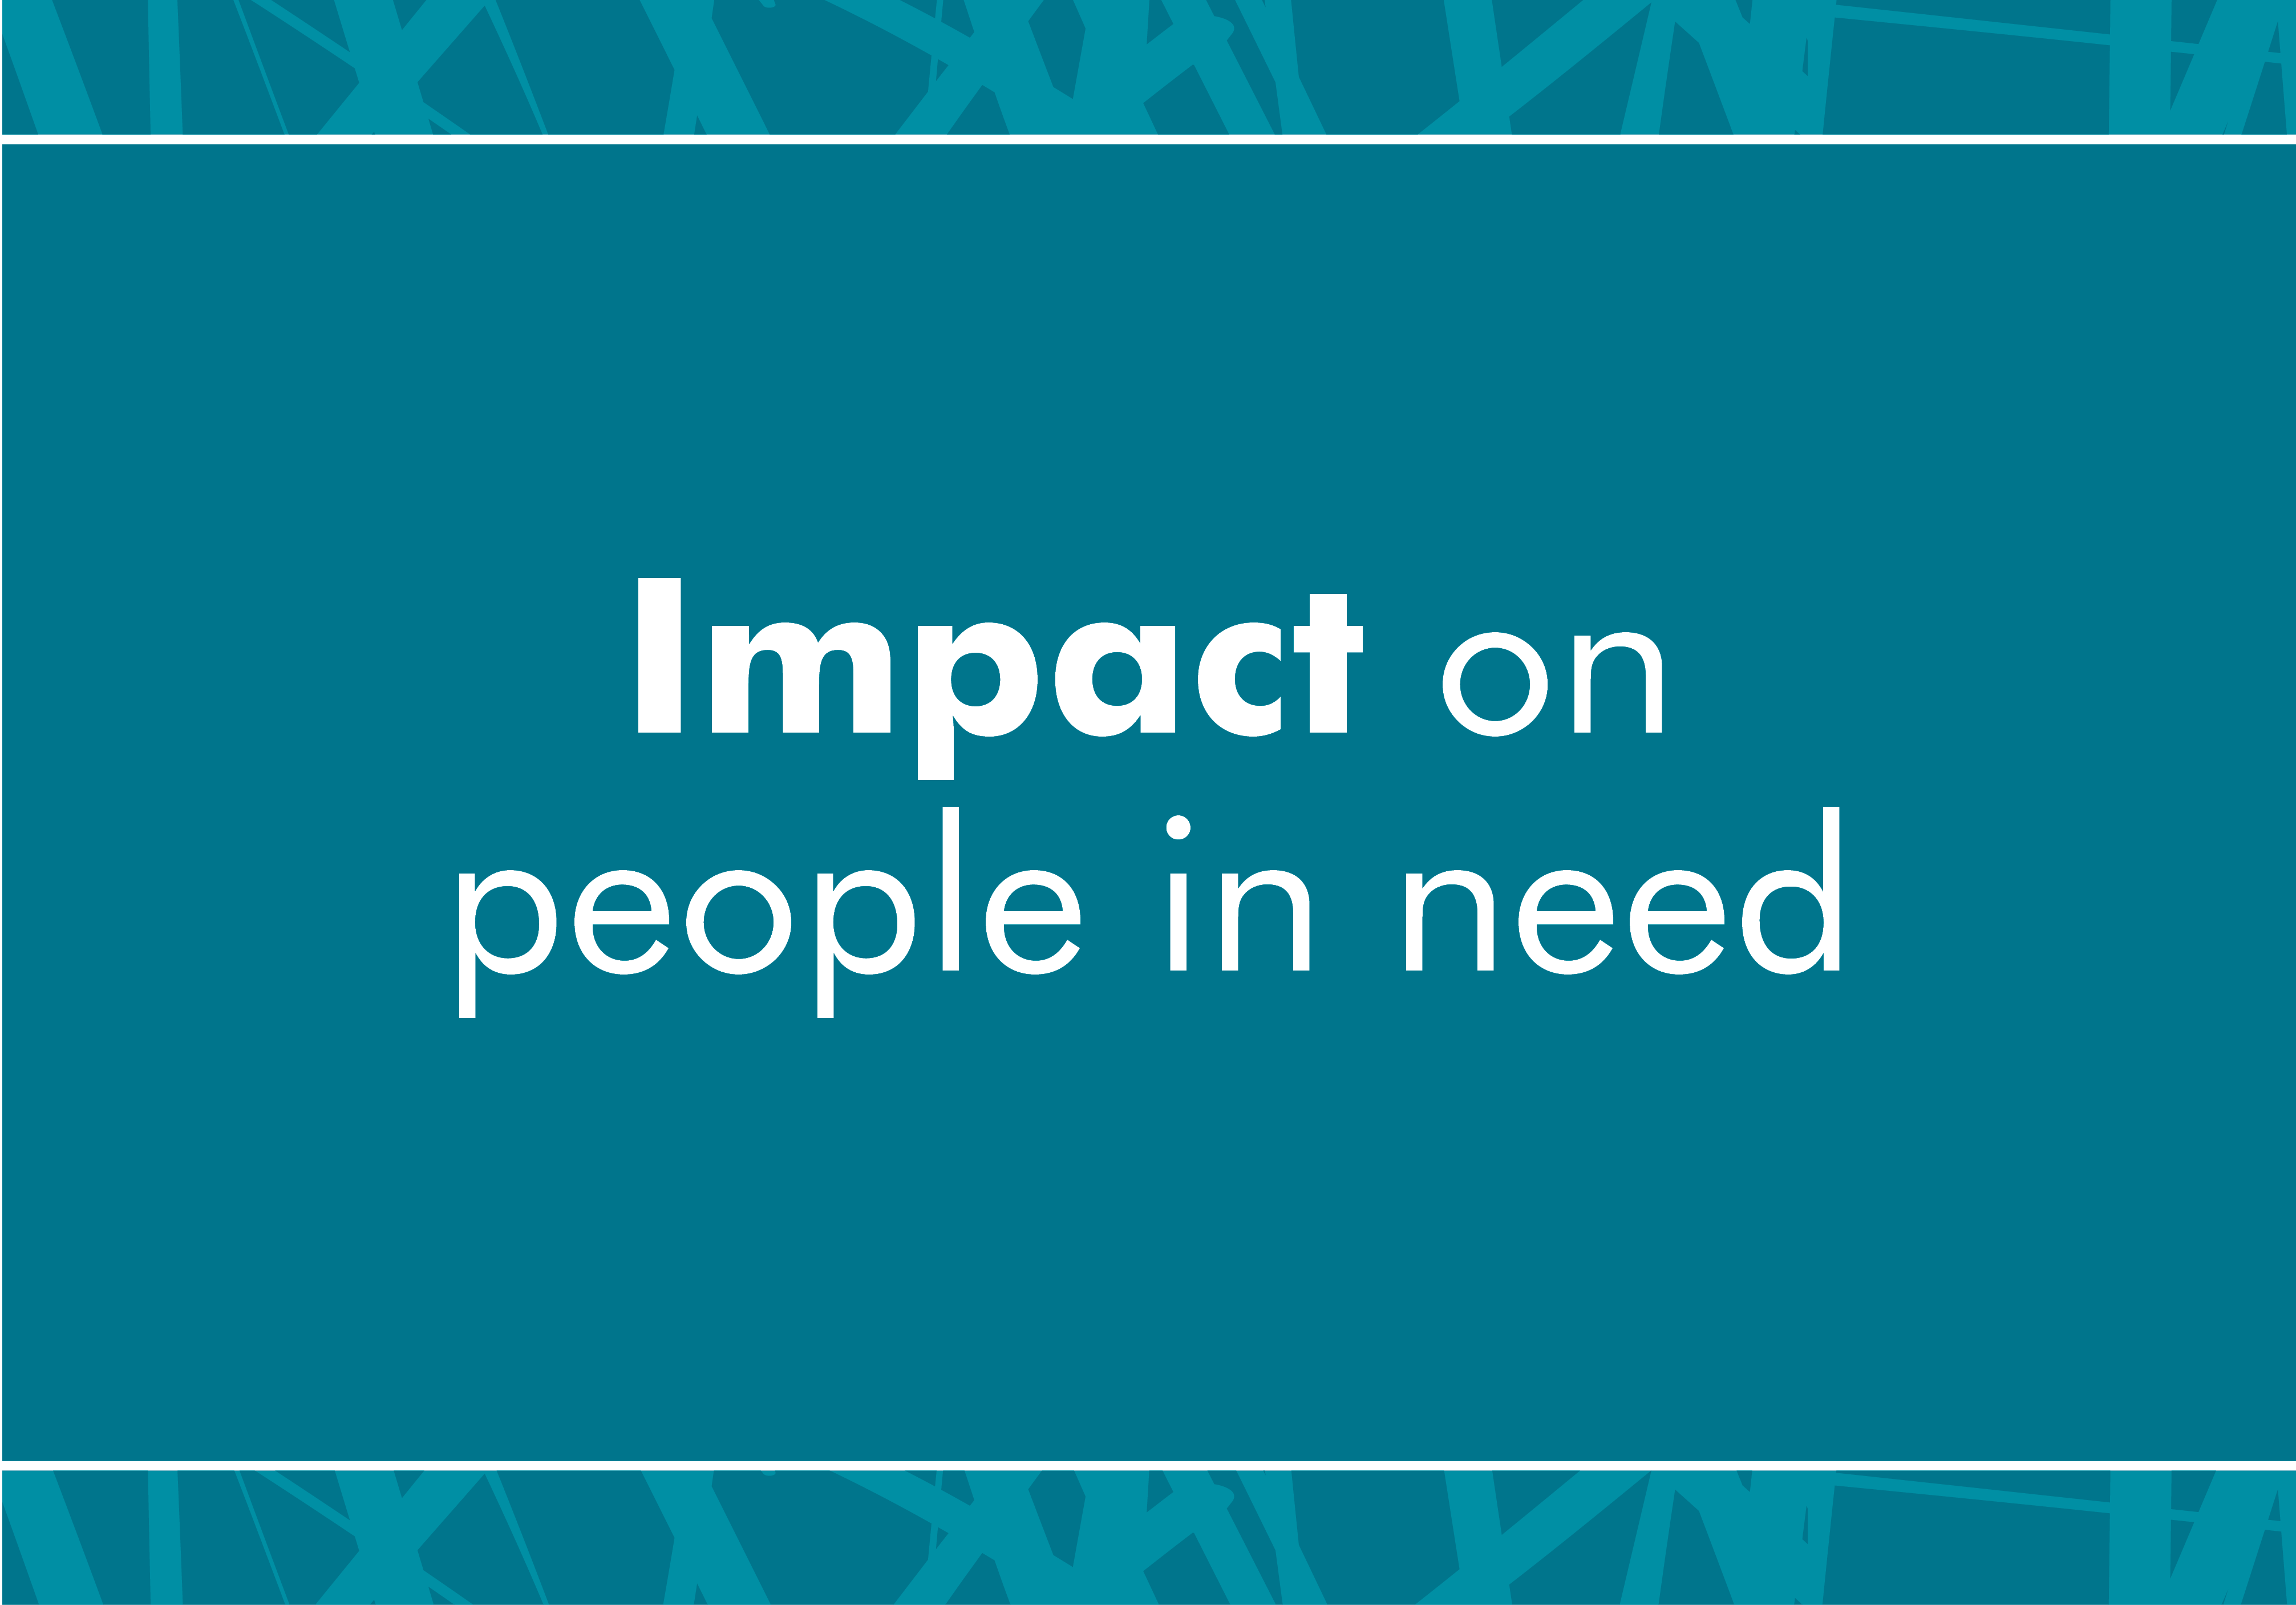 Impact on people in need